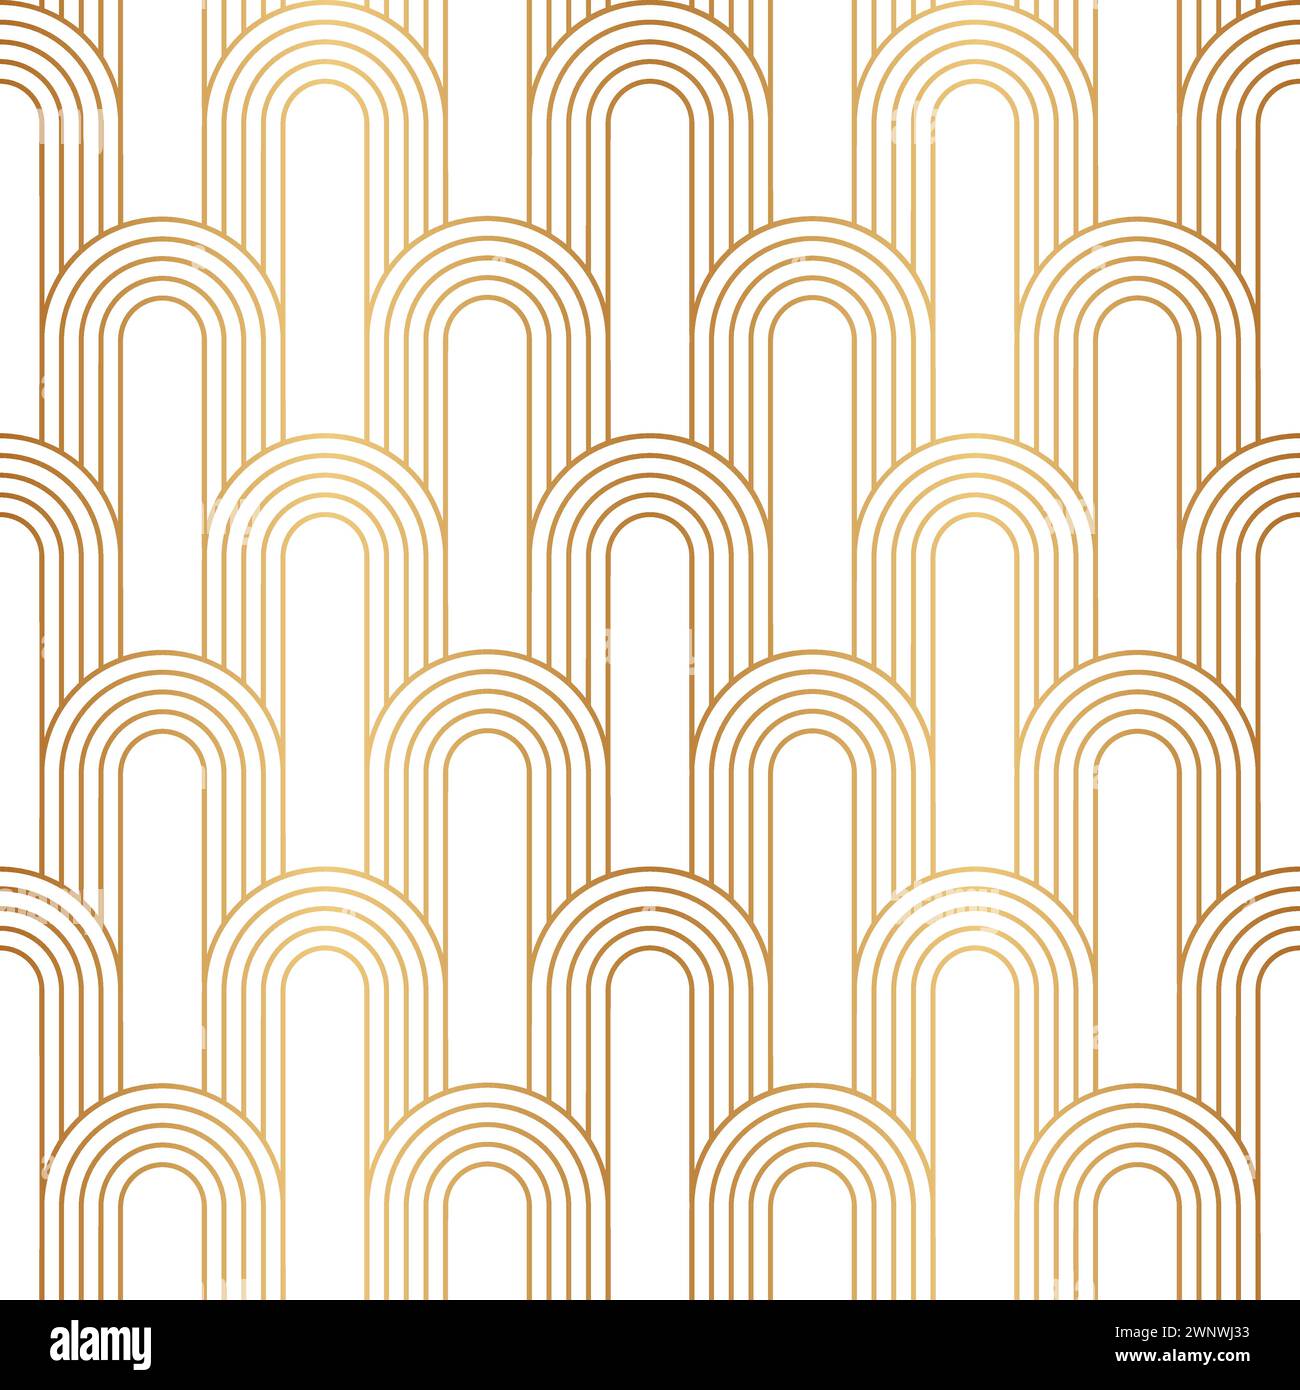 Arc seamless pattern. Repeating circle arch. Gold art deco. Golden background. Repeated geometric design for prints. Rainbow circular shape. Waves Stock Vector